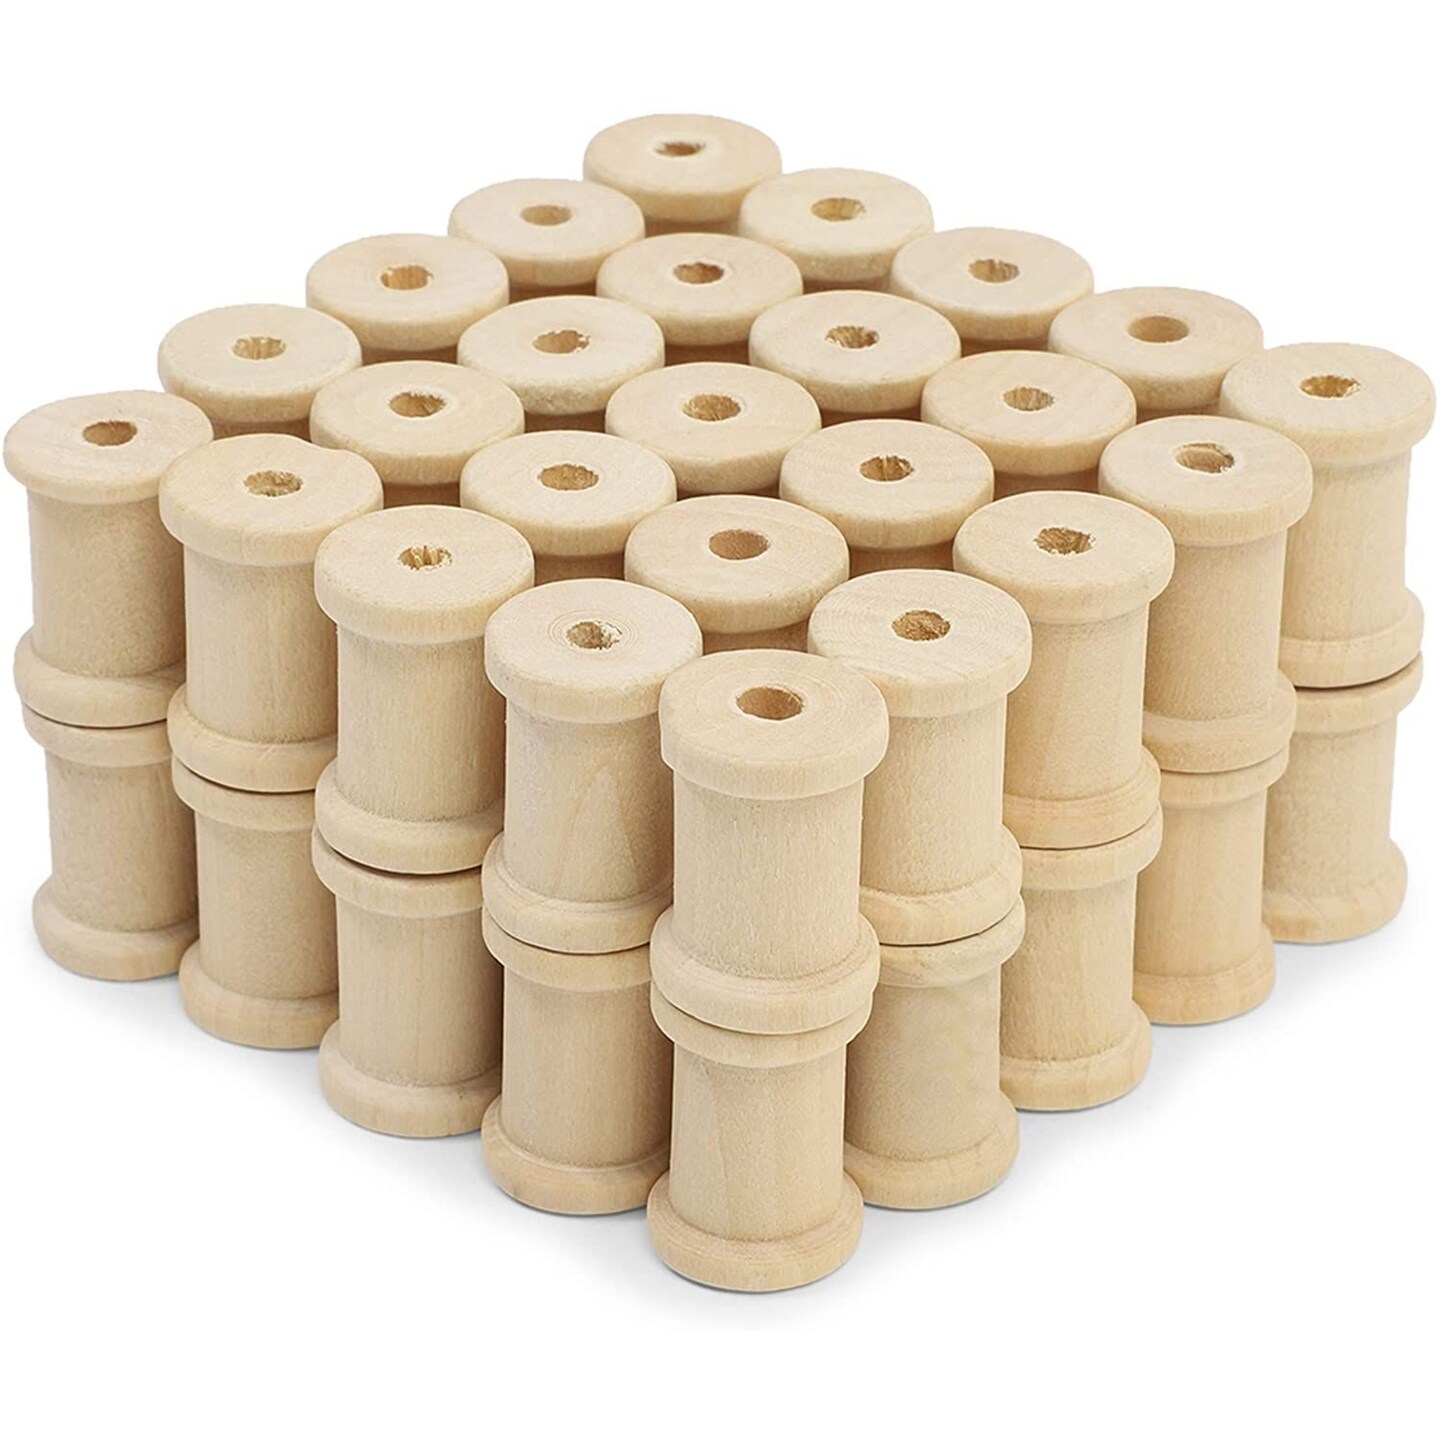 24pcs Wooden Empty Thread Spools Large Unfinished Wood Spools Wire Weaving Bobbins for Arts Crafts Cord Roll, Women's, Blue